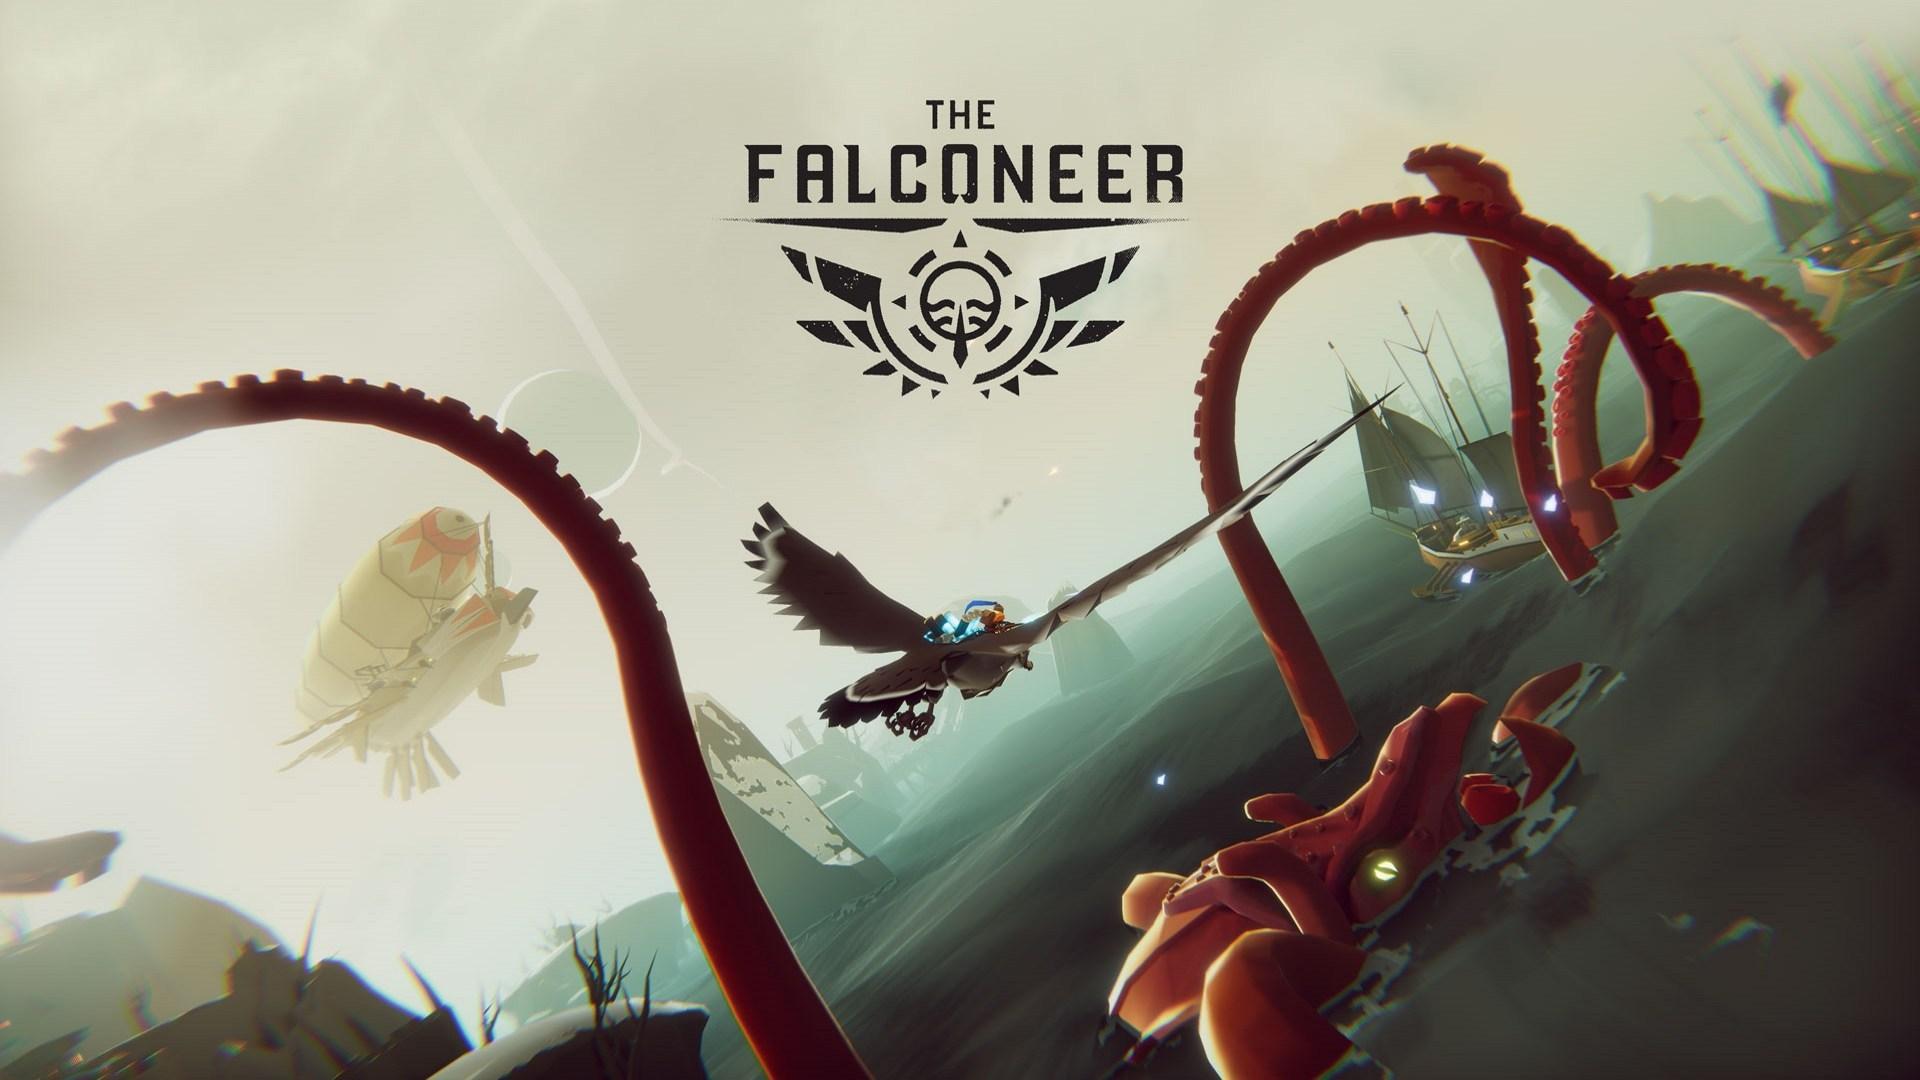 Mount a Falcon and Dogfight in this Aerial Combat RPG, The Falconeer